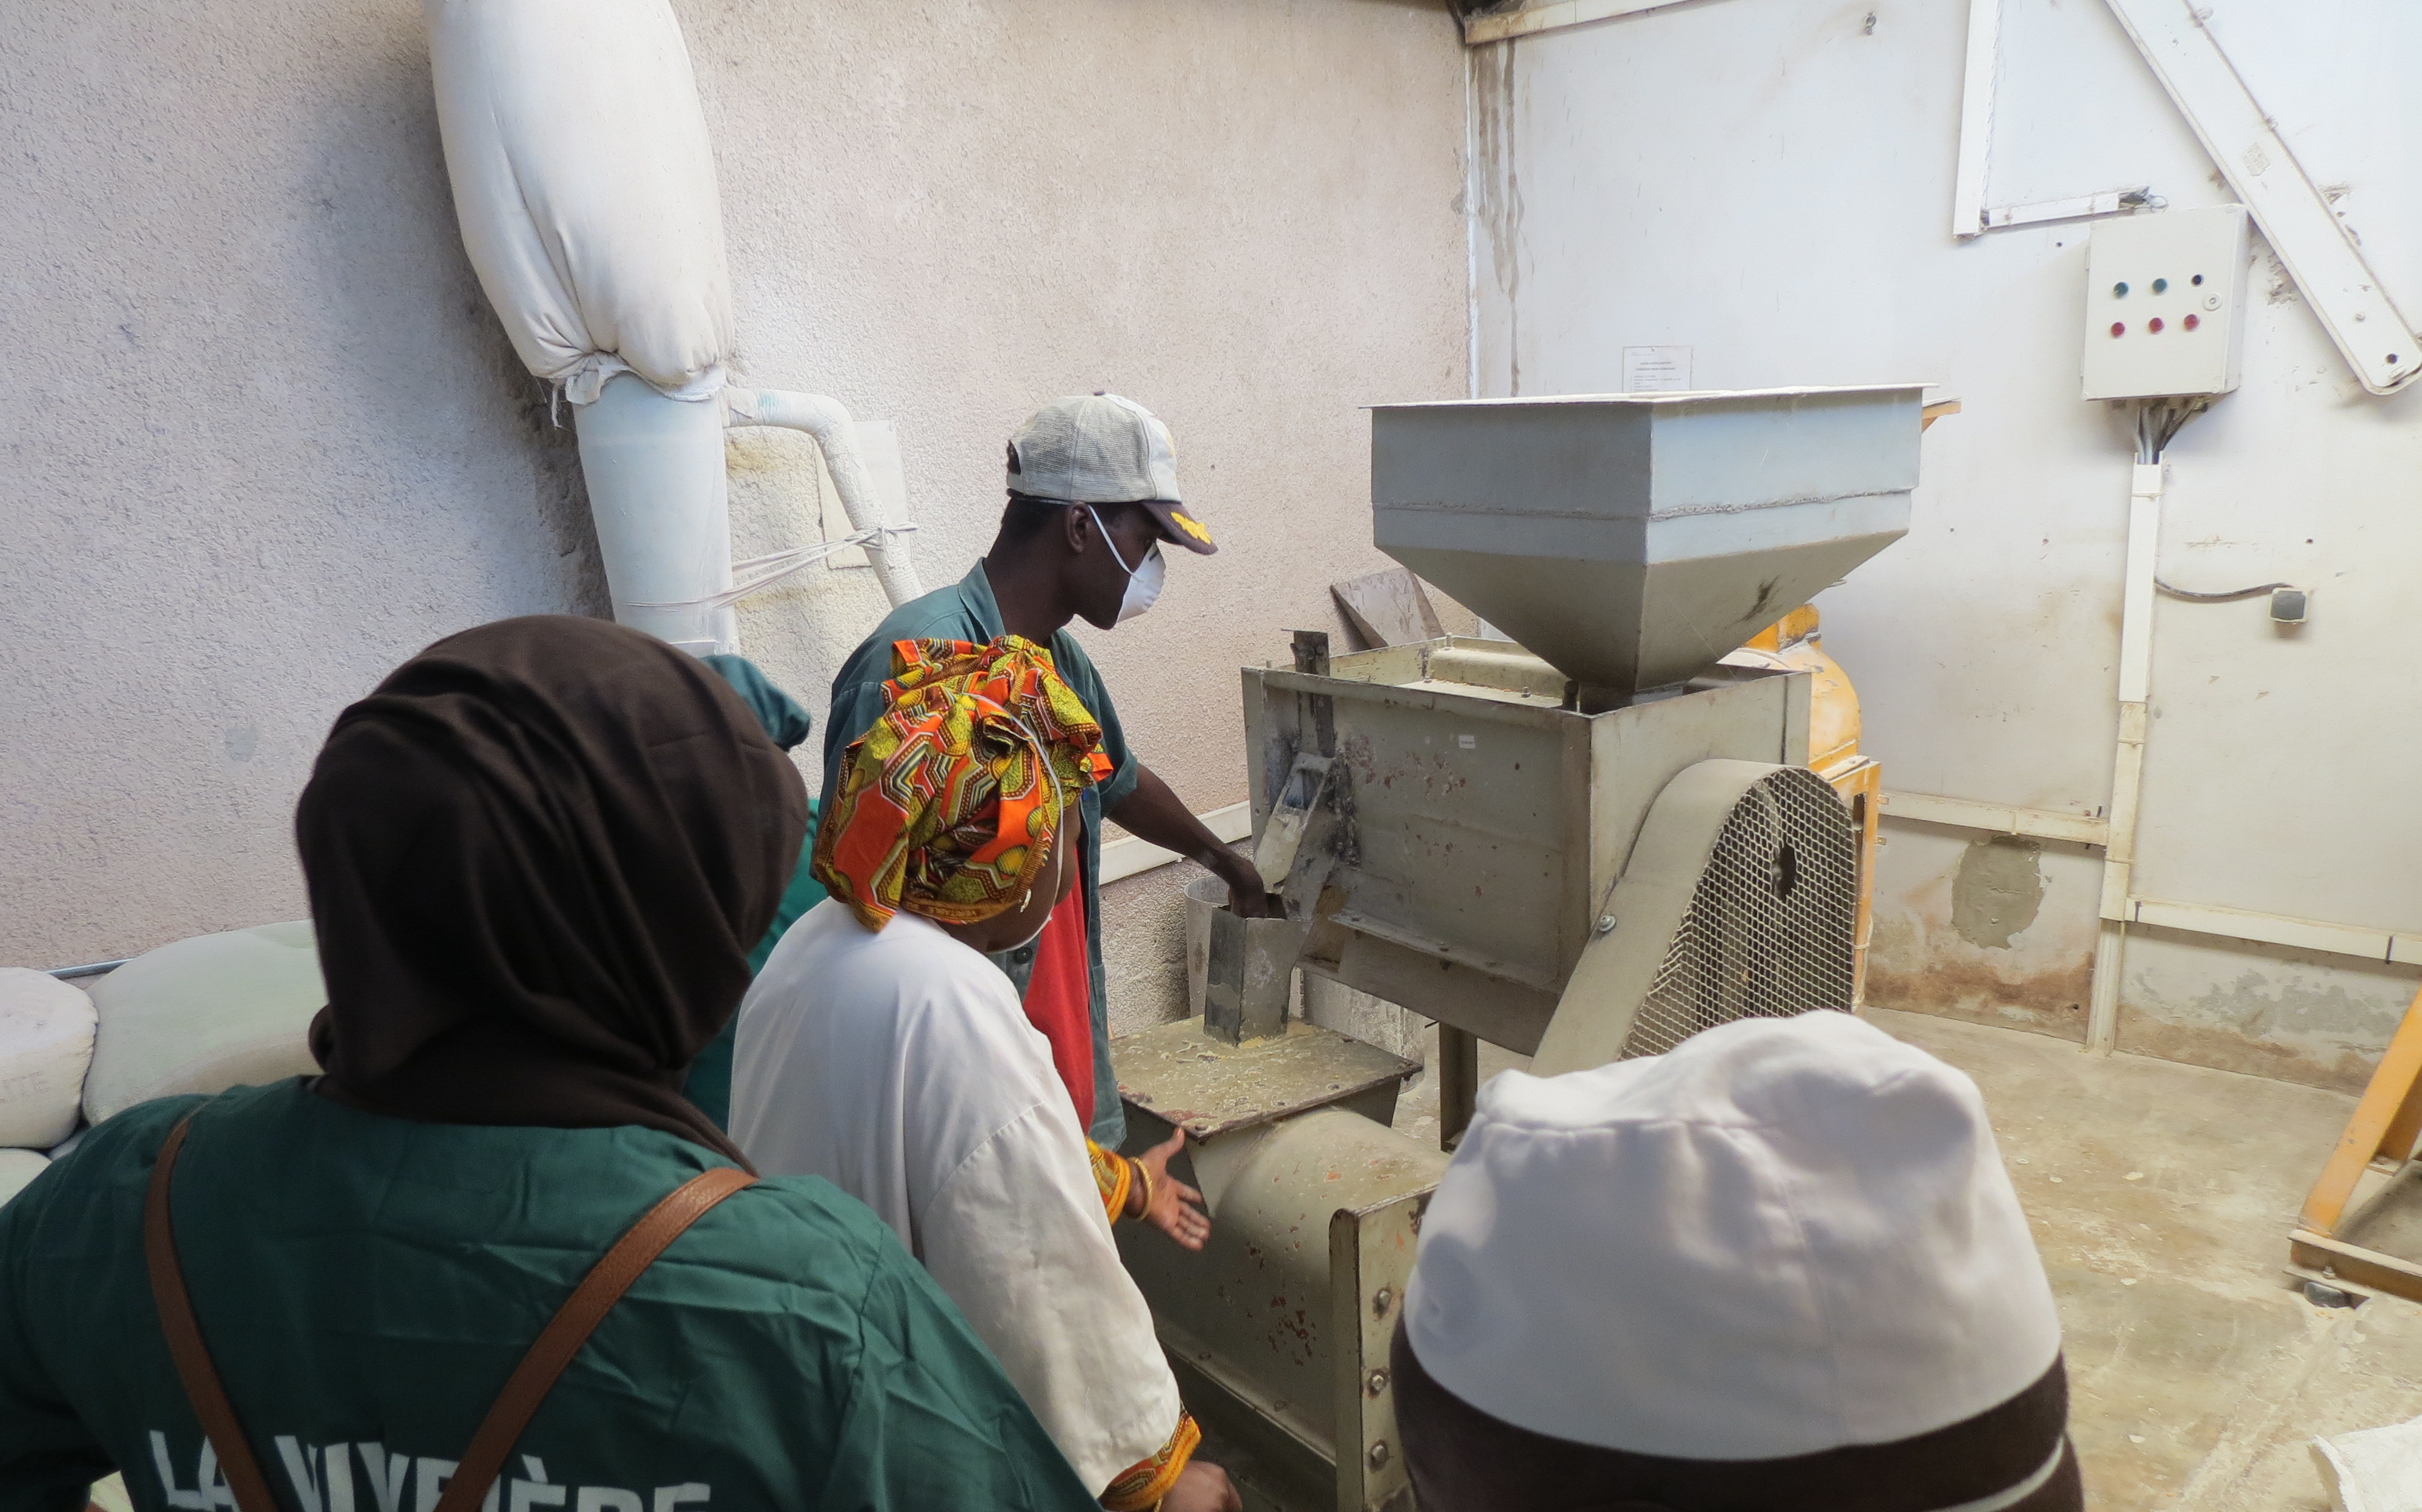 Bineta and employees of La Vivriére demonstrate how to use the machinery used to process millet flour.